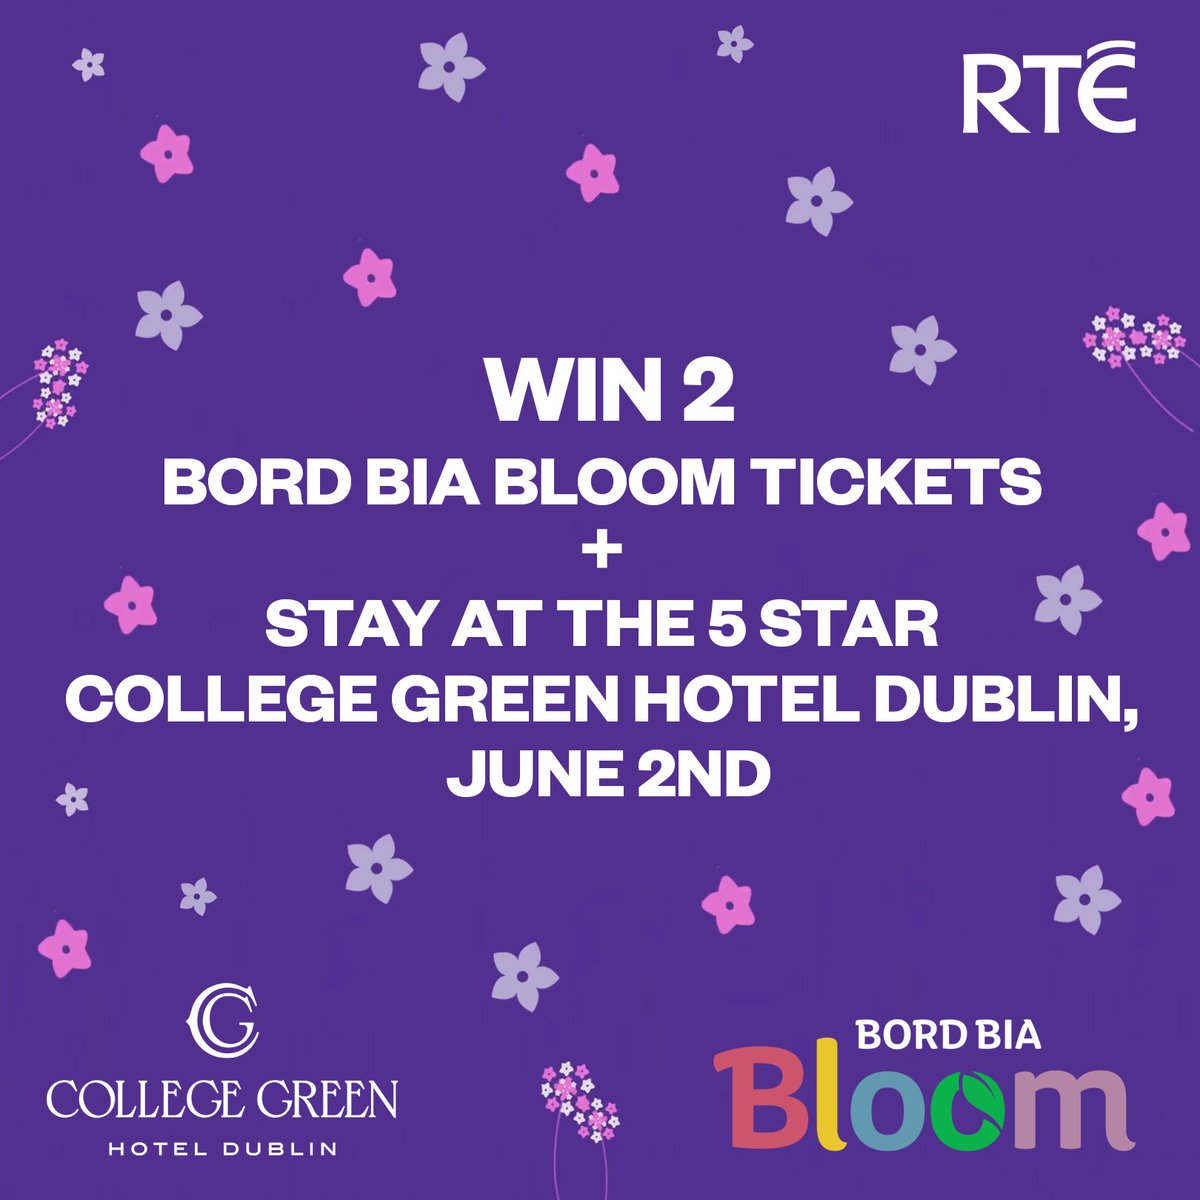 🌺Pop over to RTÉ on Instagram and be in with the chance of winning 2 @BordBiaBloom tickets & stay at the 5 star @collegegreenhd on June 2nd. 🌹🌸🌷 #BordBiaBloom2024 🌼🌺🌻 | Supported by RTÉ 🌺Enter here: instagram.com/p/C7RuxYFs8Rz/